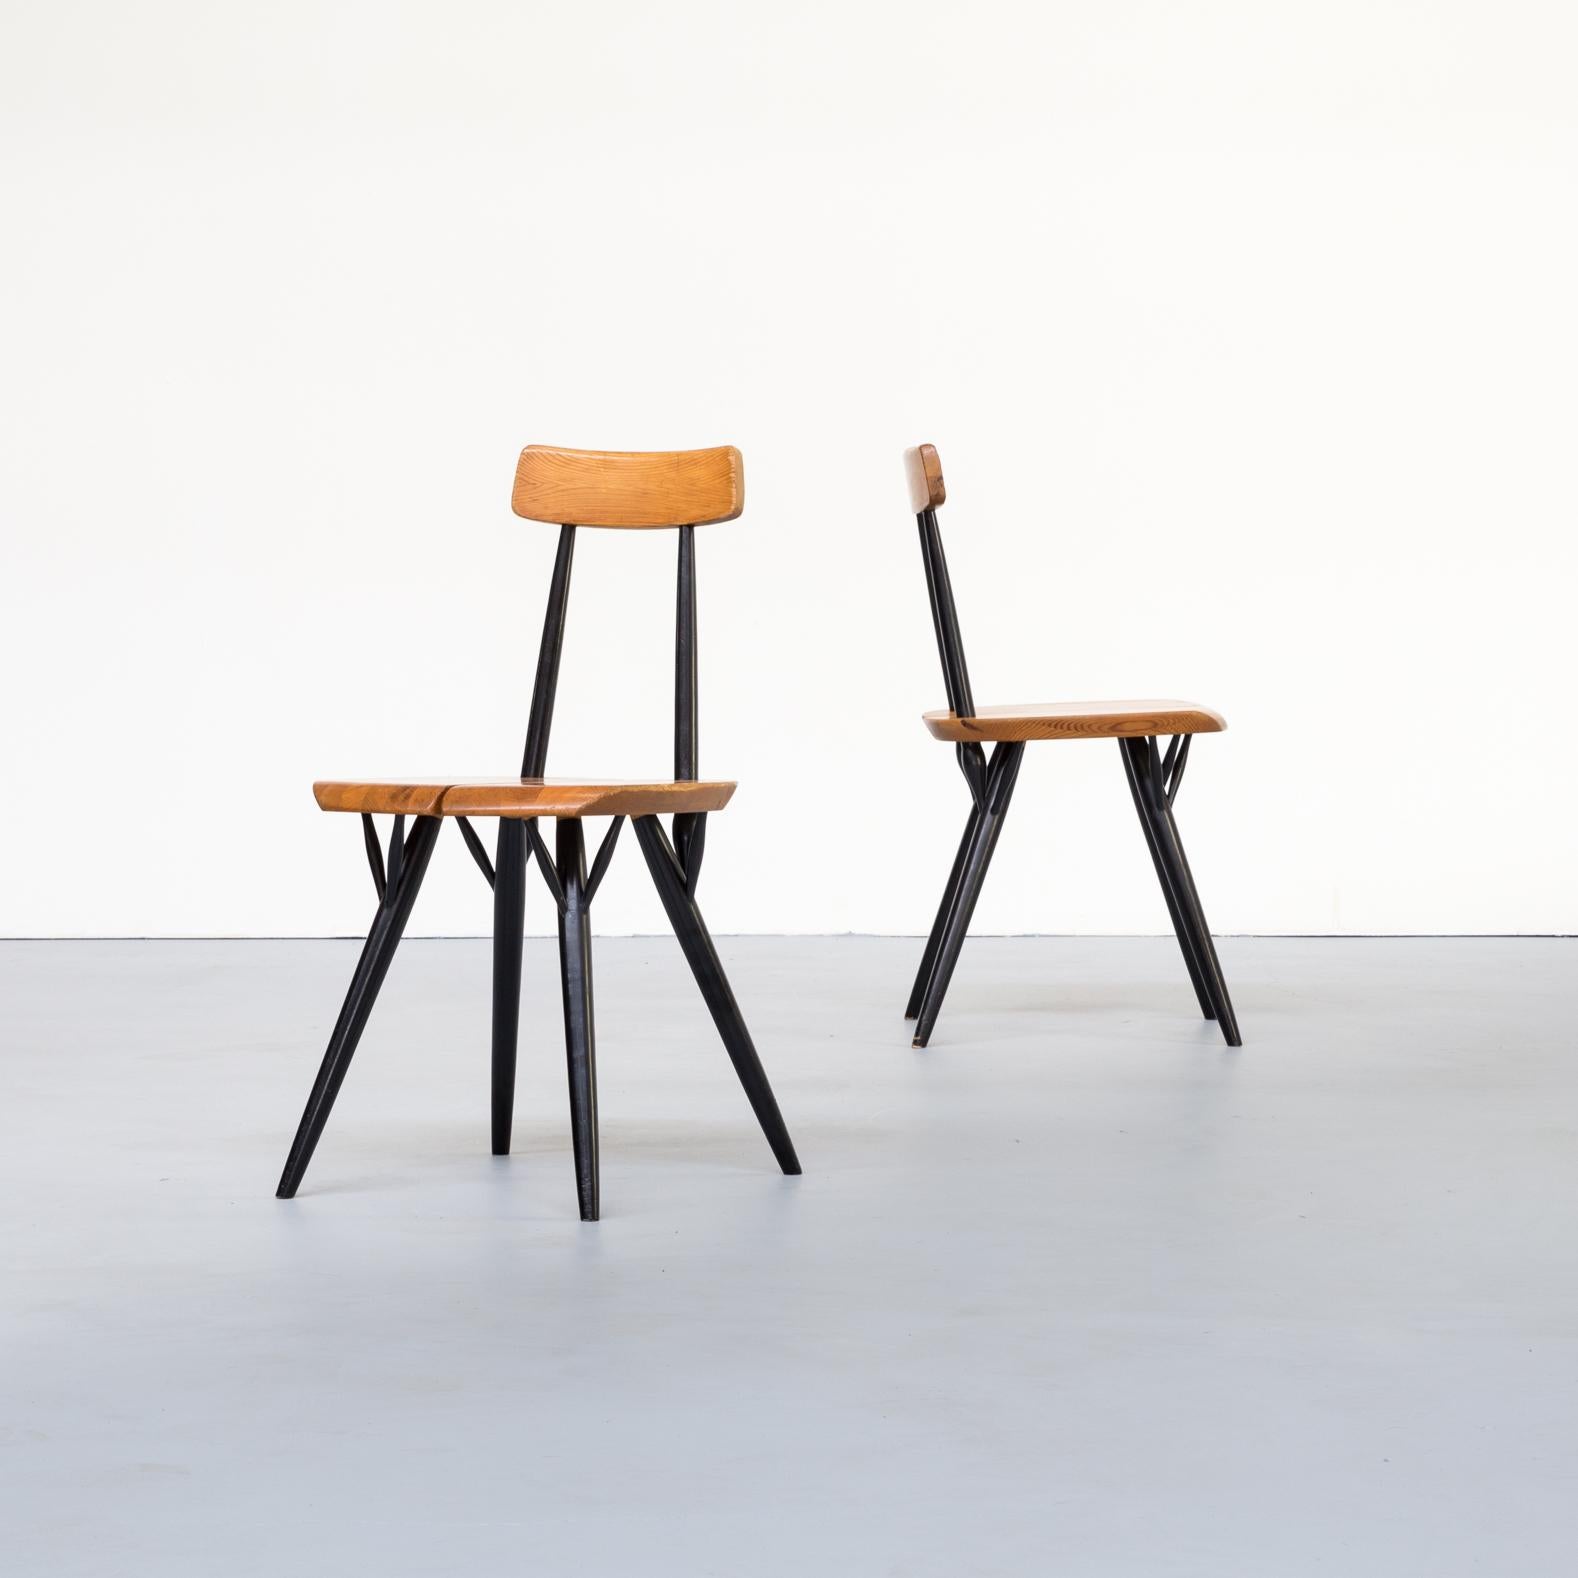 1960s Ilmari Tapiovaara “Pirkka” dining chair for Laukaan Puu, set of 2. Crafted entirely from solid wood, the Pirkka chair combines a birch frame with a pine seat and backrest. The solid lines of the pine elements contrast strikingly with the